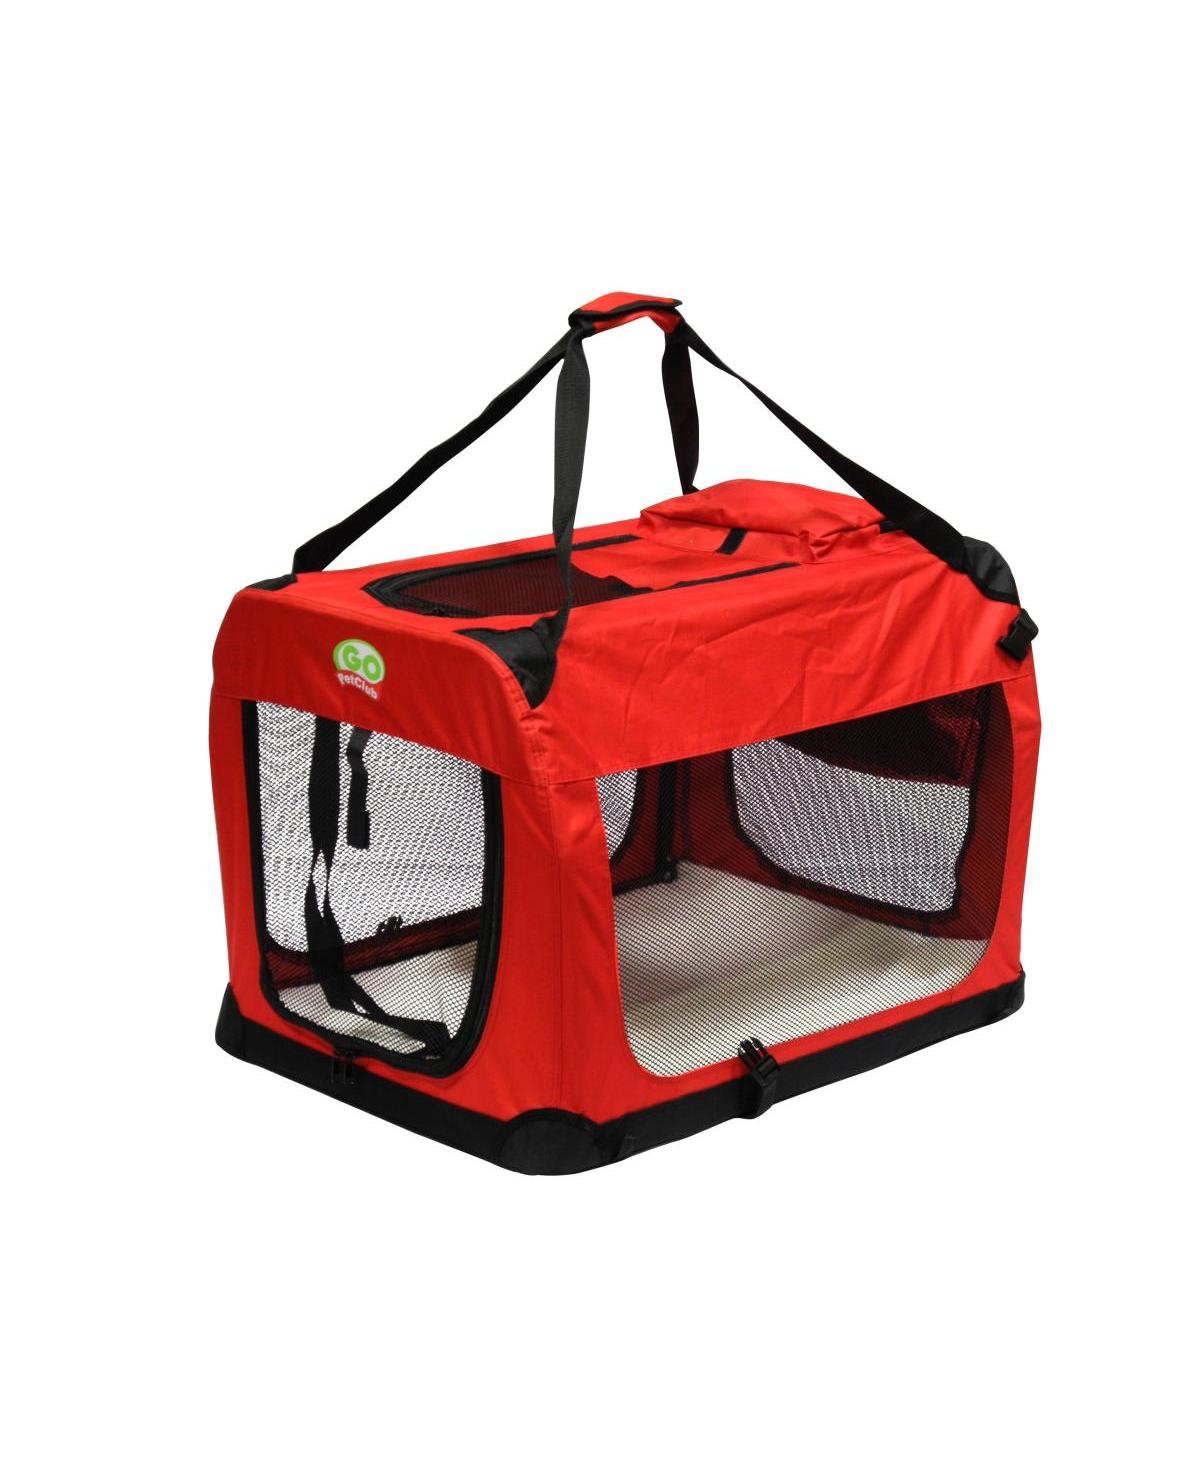 Cp-28 20.5 in. Foldable Pet Crate, Red - Open miscellaneous